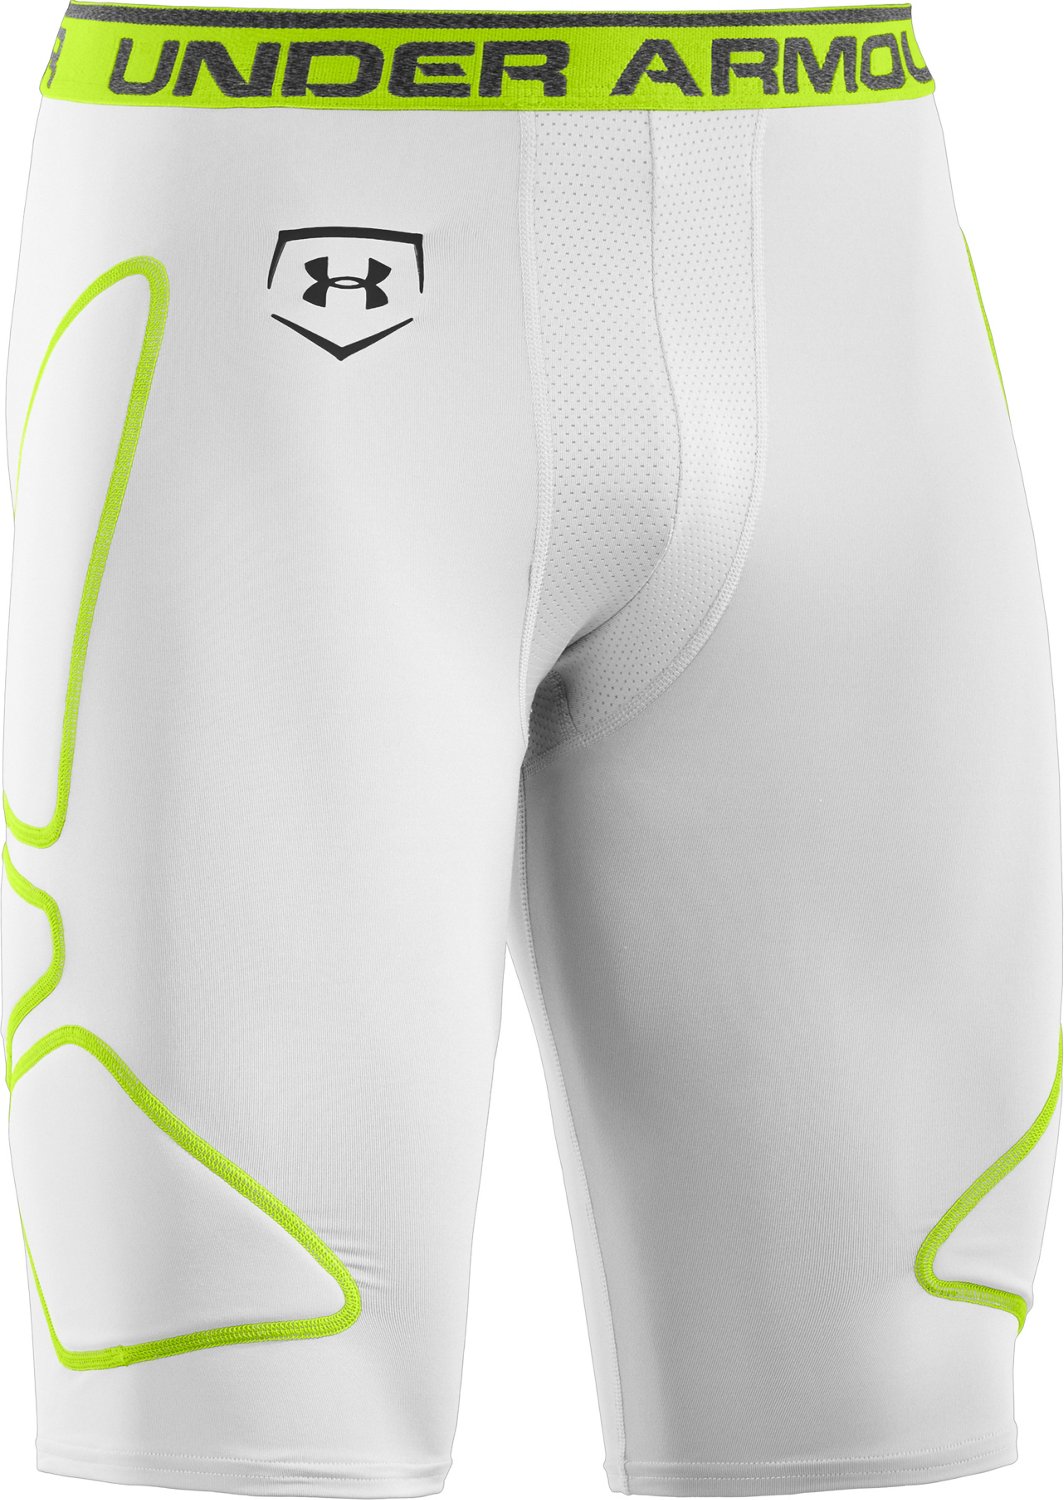 under armour baseball sliding shorts with cup